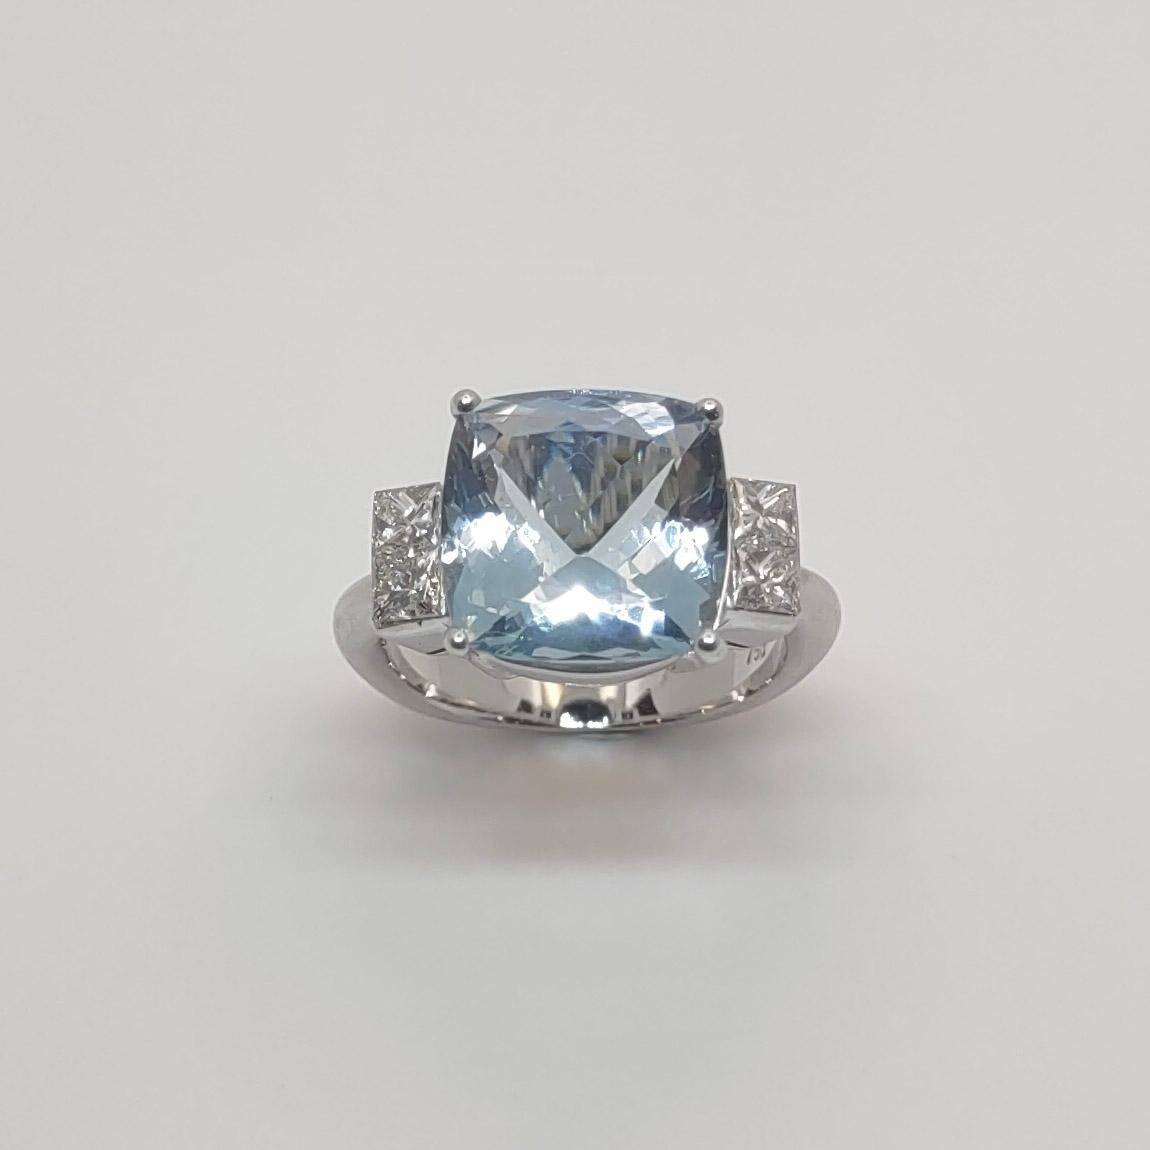 Designer S.Georgios is handmade in 18 Karat White gold and features a solitaire cushion cut Aquamarine of top quality with a weight of  5.06 Carat. On the sides ring features an invissible setting of emerald cut White Diamonds of total weight of